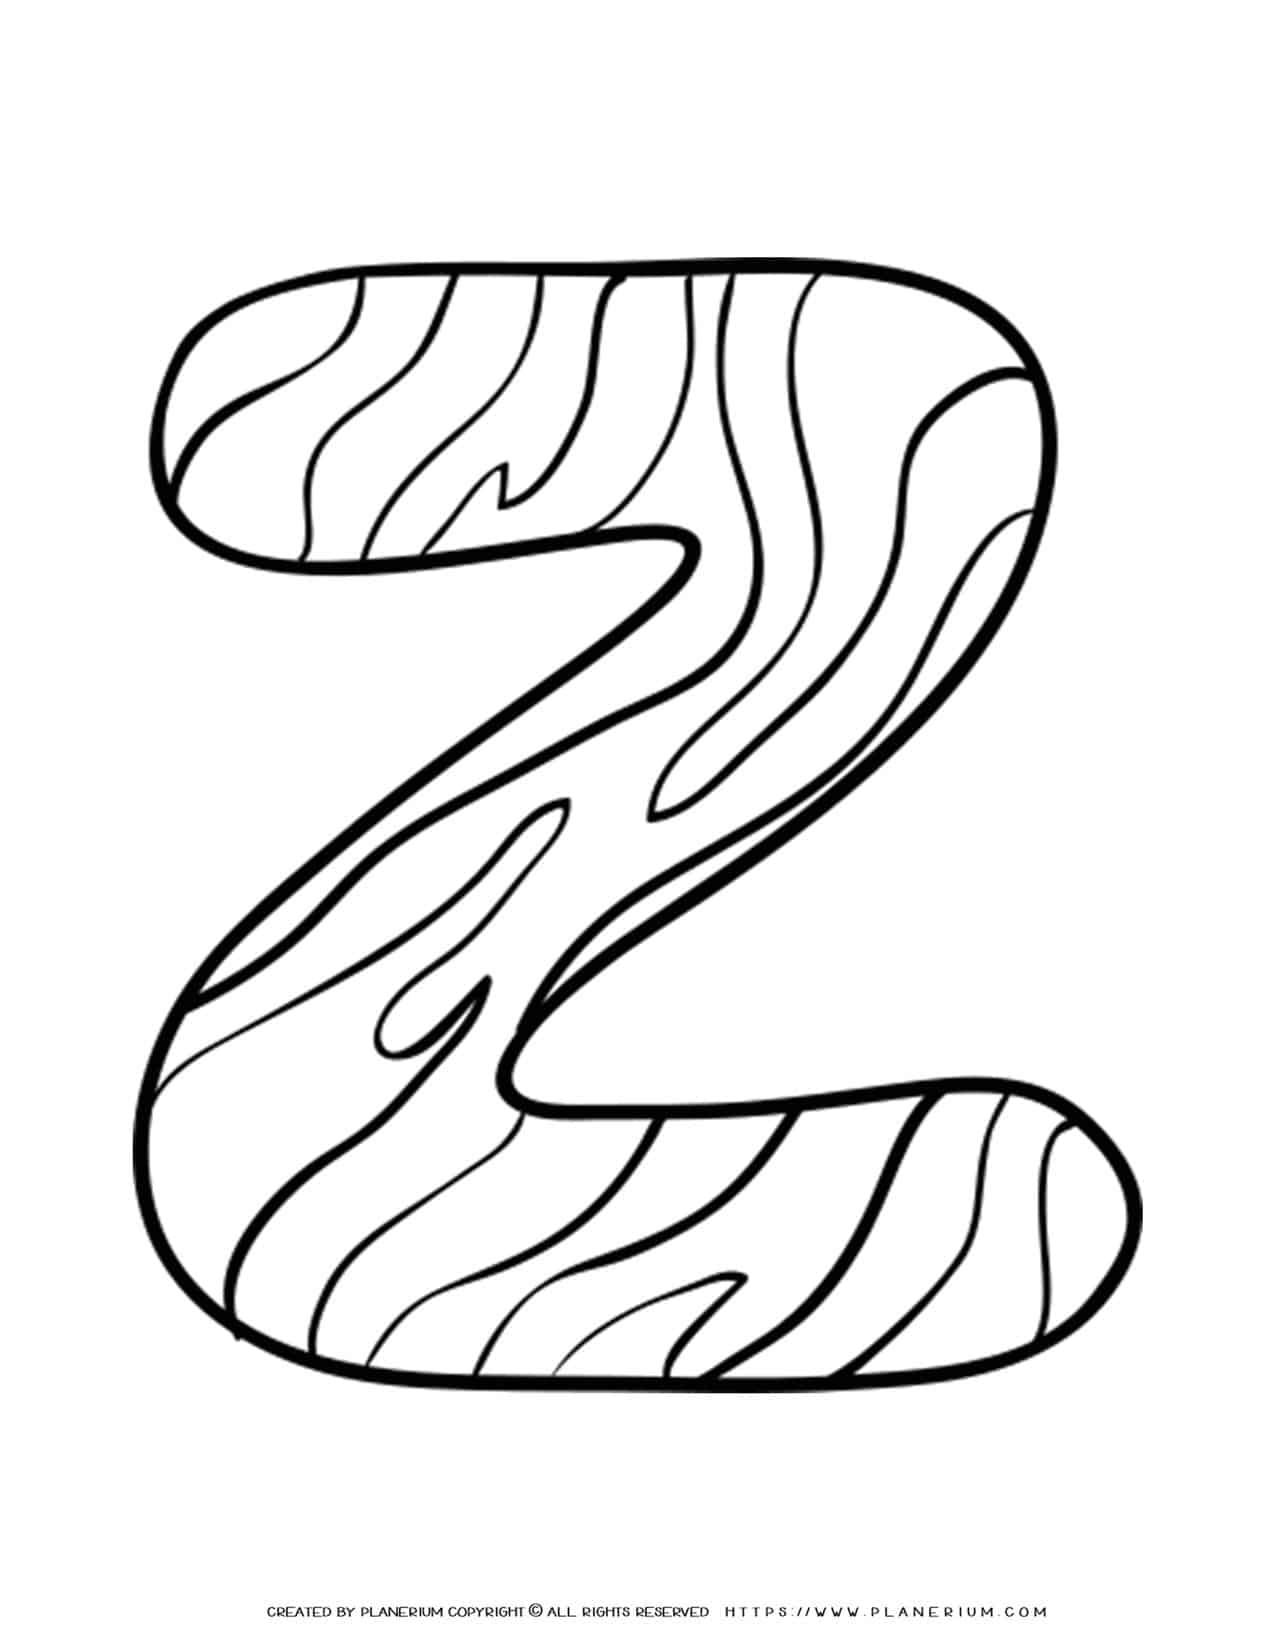 English Alphabet - Capital Z with Pattern - Coloring Page | Planerium